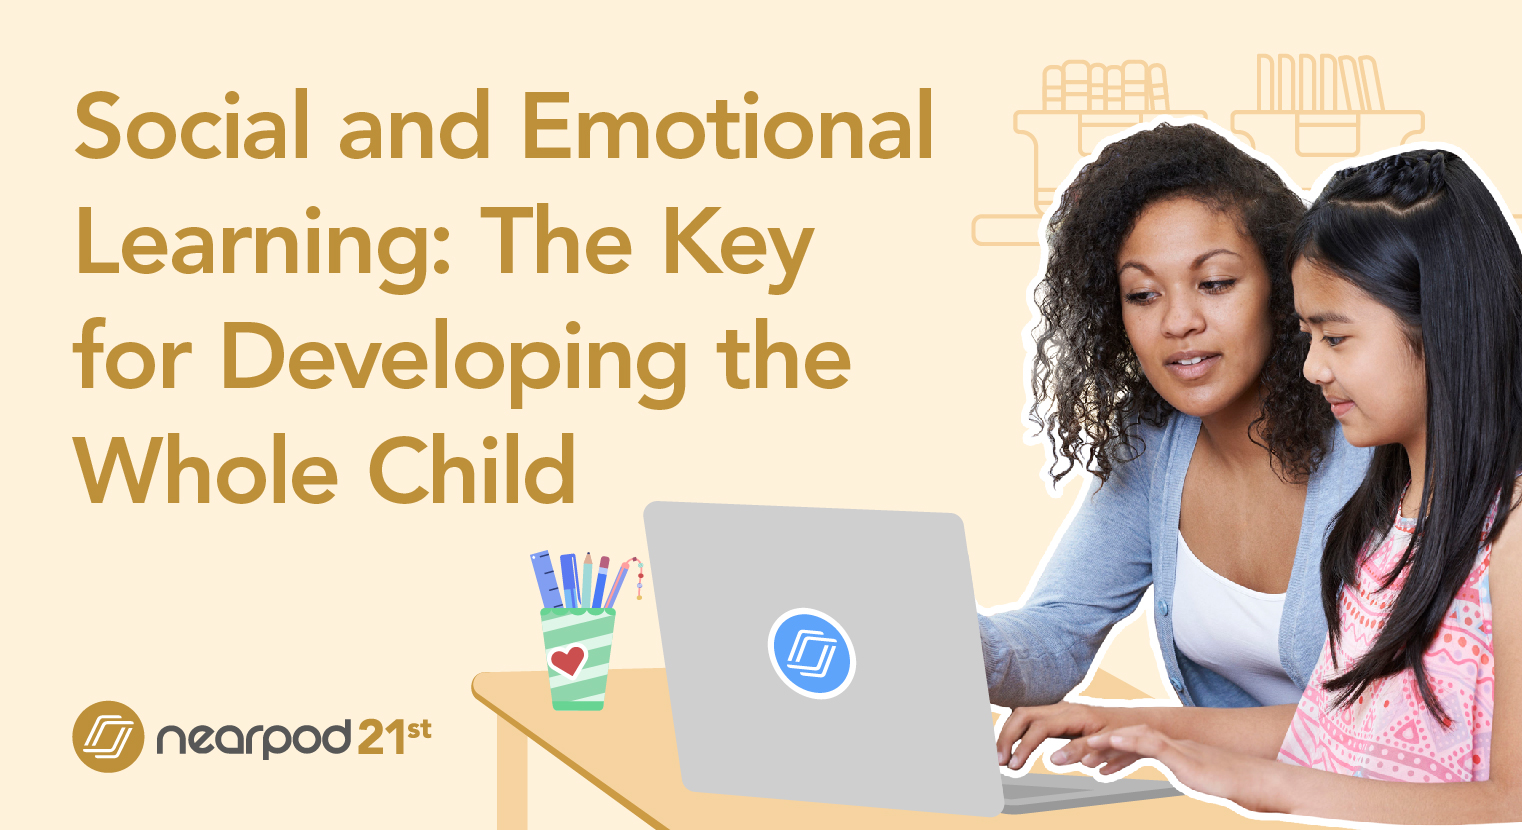 Social and Emotional Learning – The Key for Developing the Whole Child